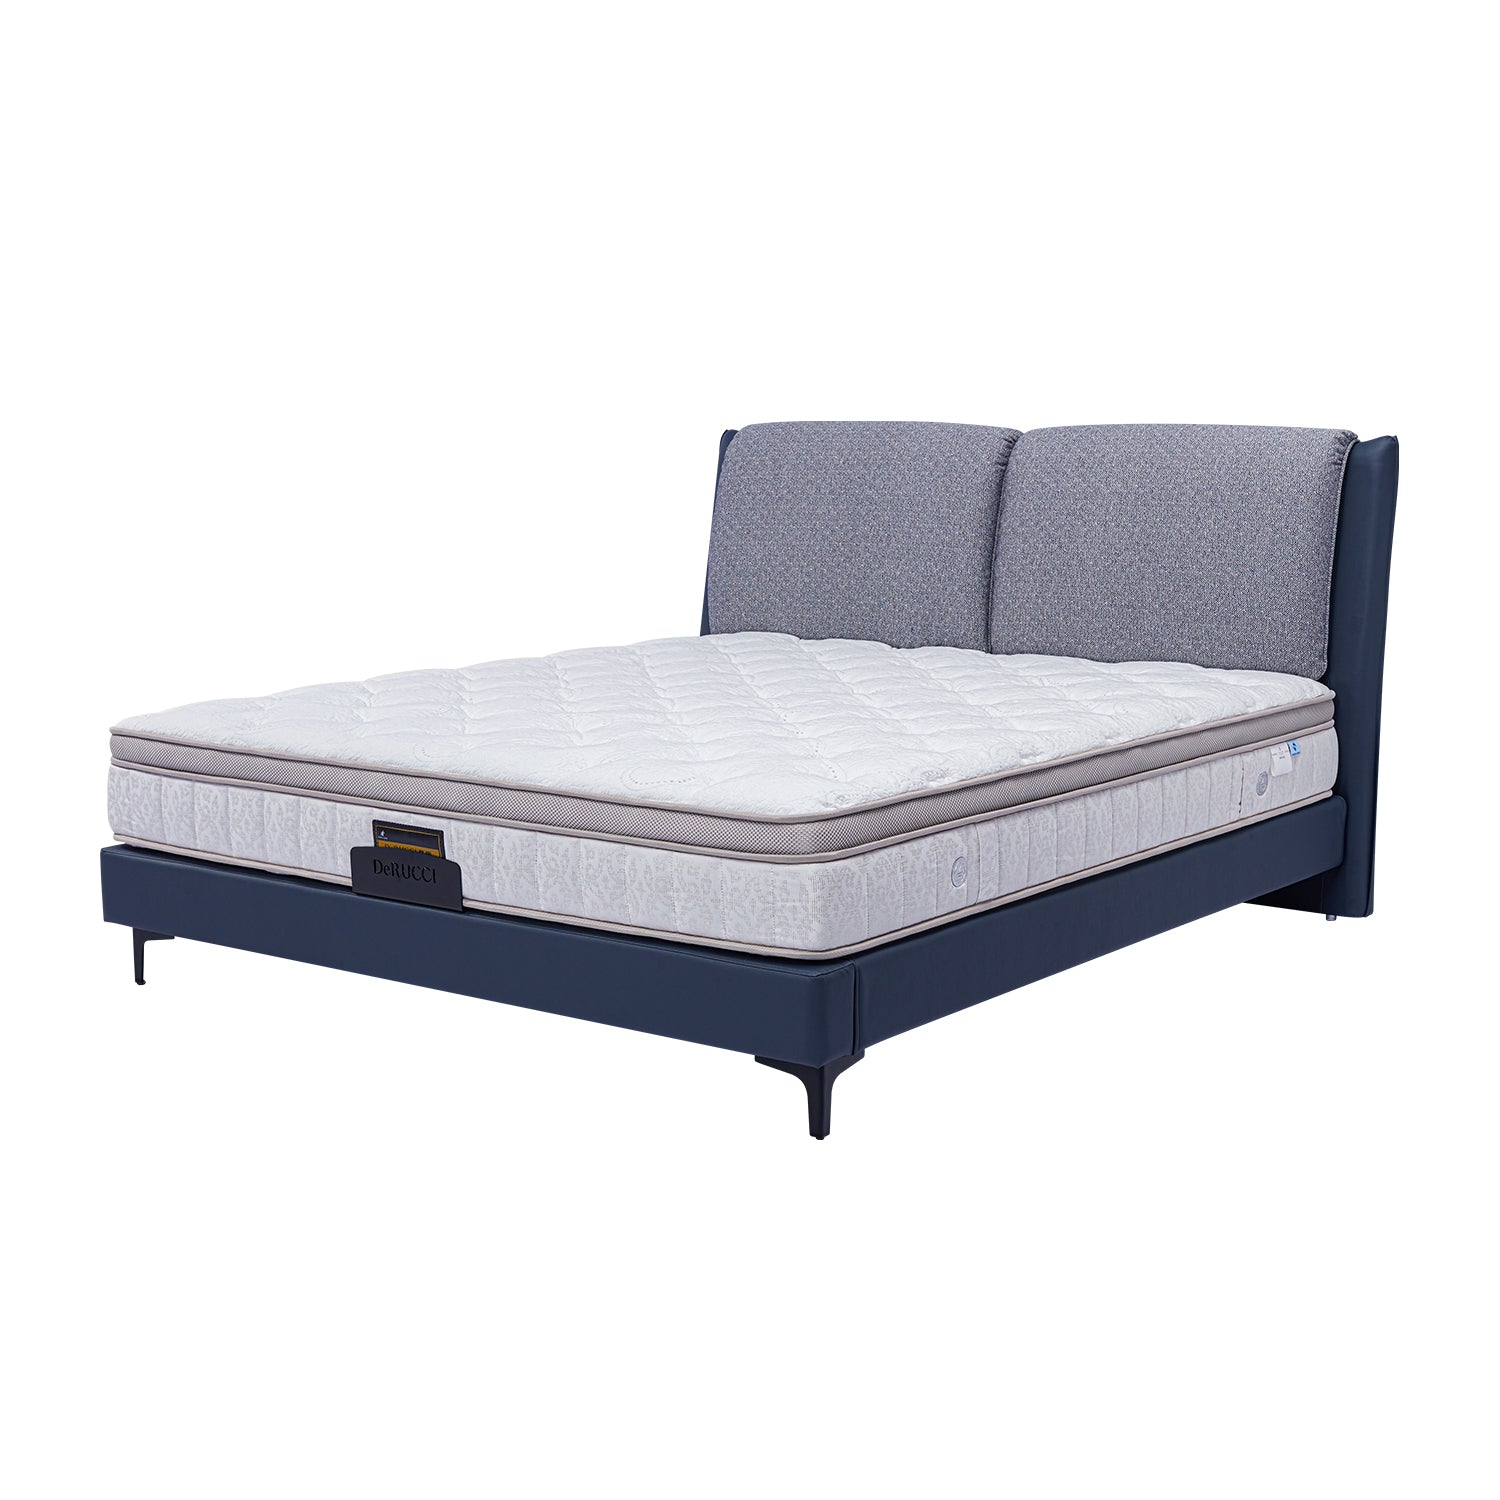 DeRUCCI Bed Frame BOC1-017 with cushioned grey fabric headboard and dark blue base, featuring a high-quality mattress with DeRUCCI branding.